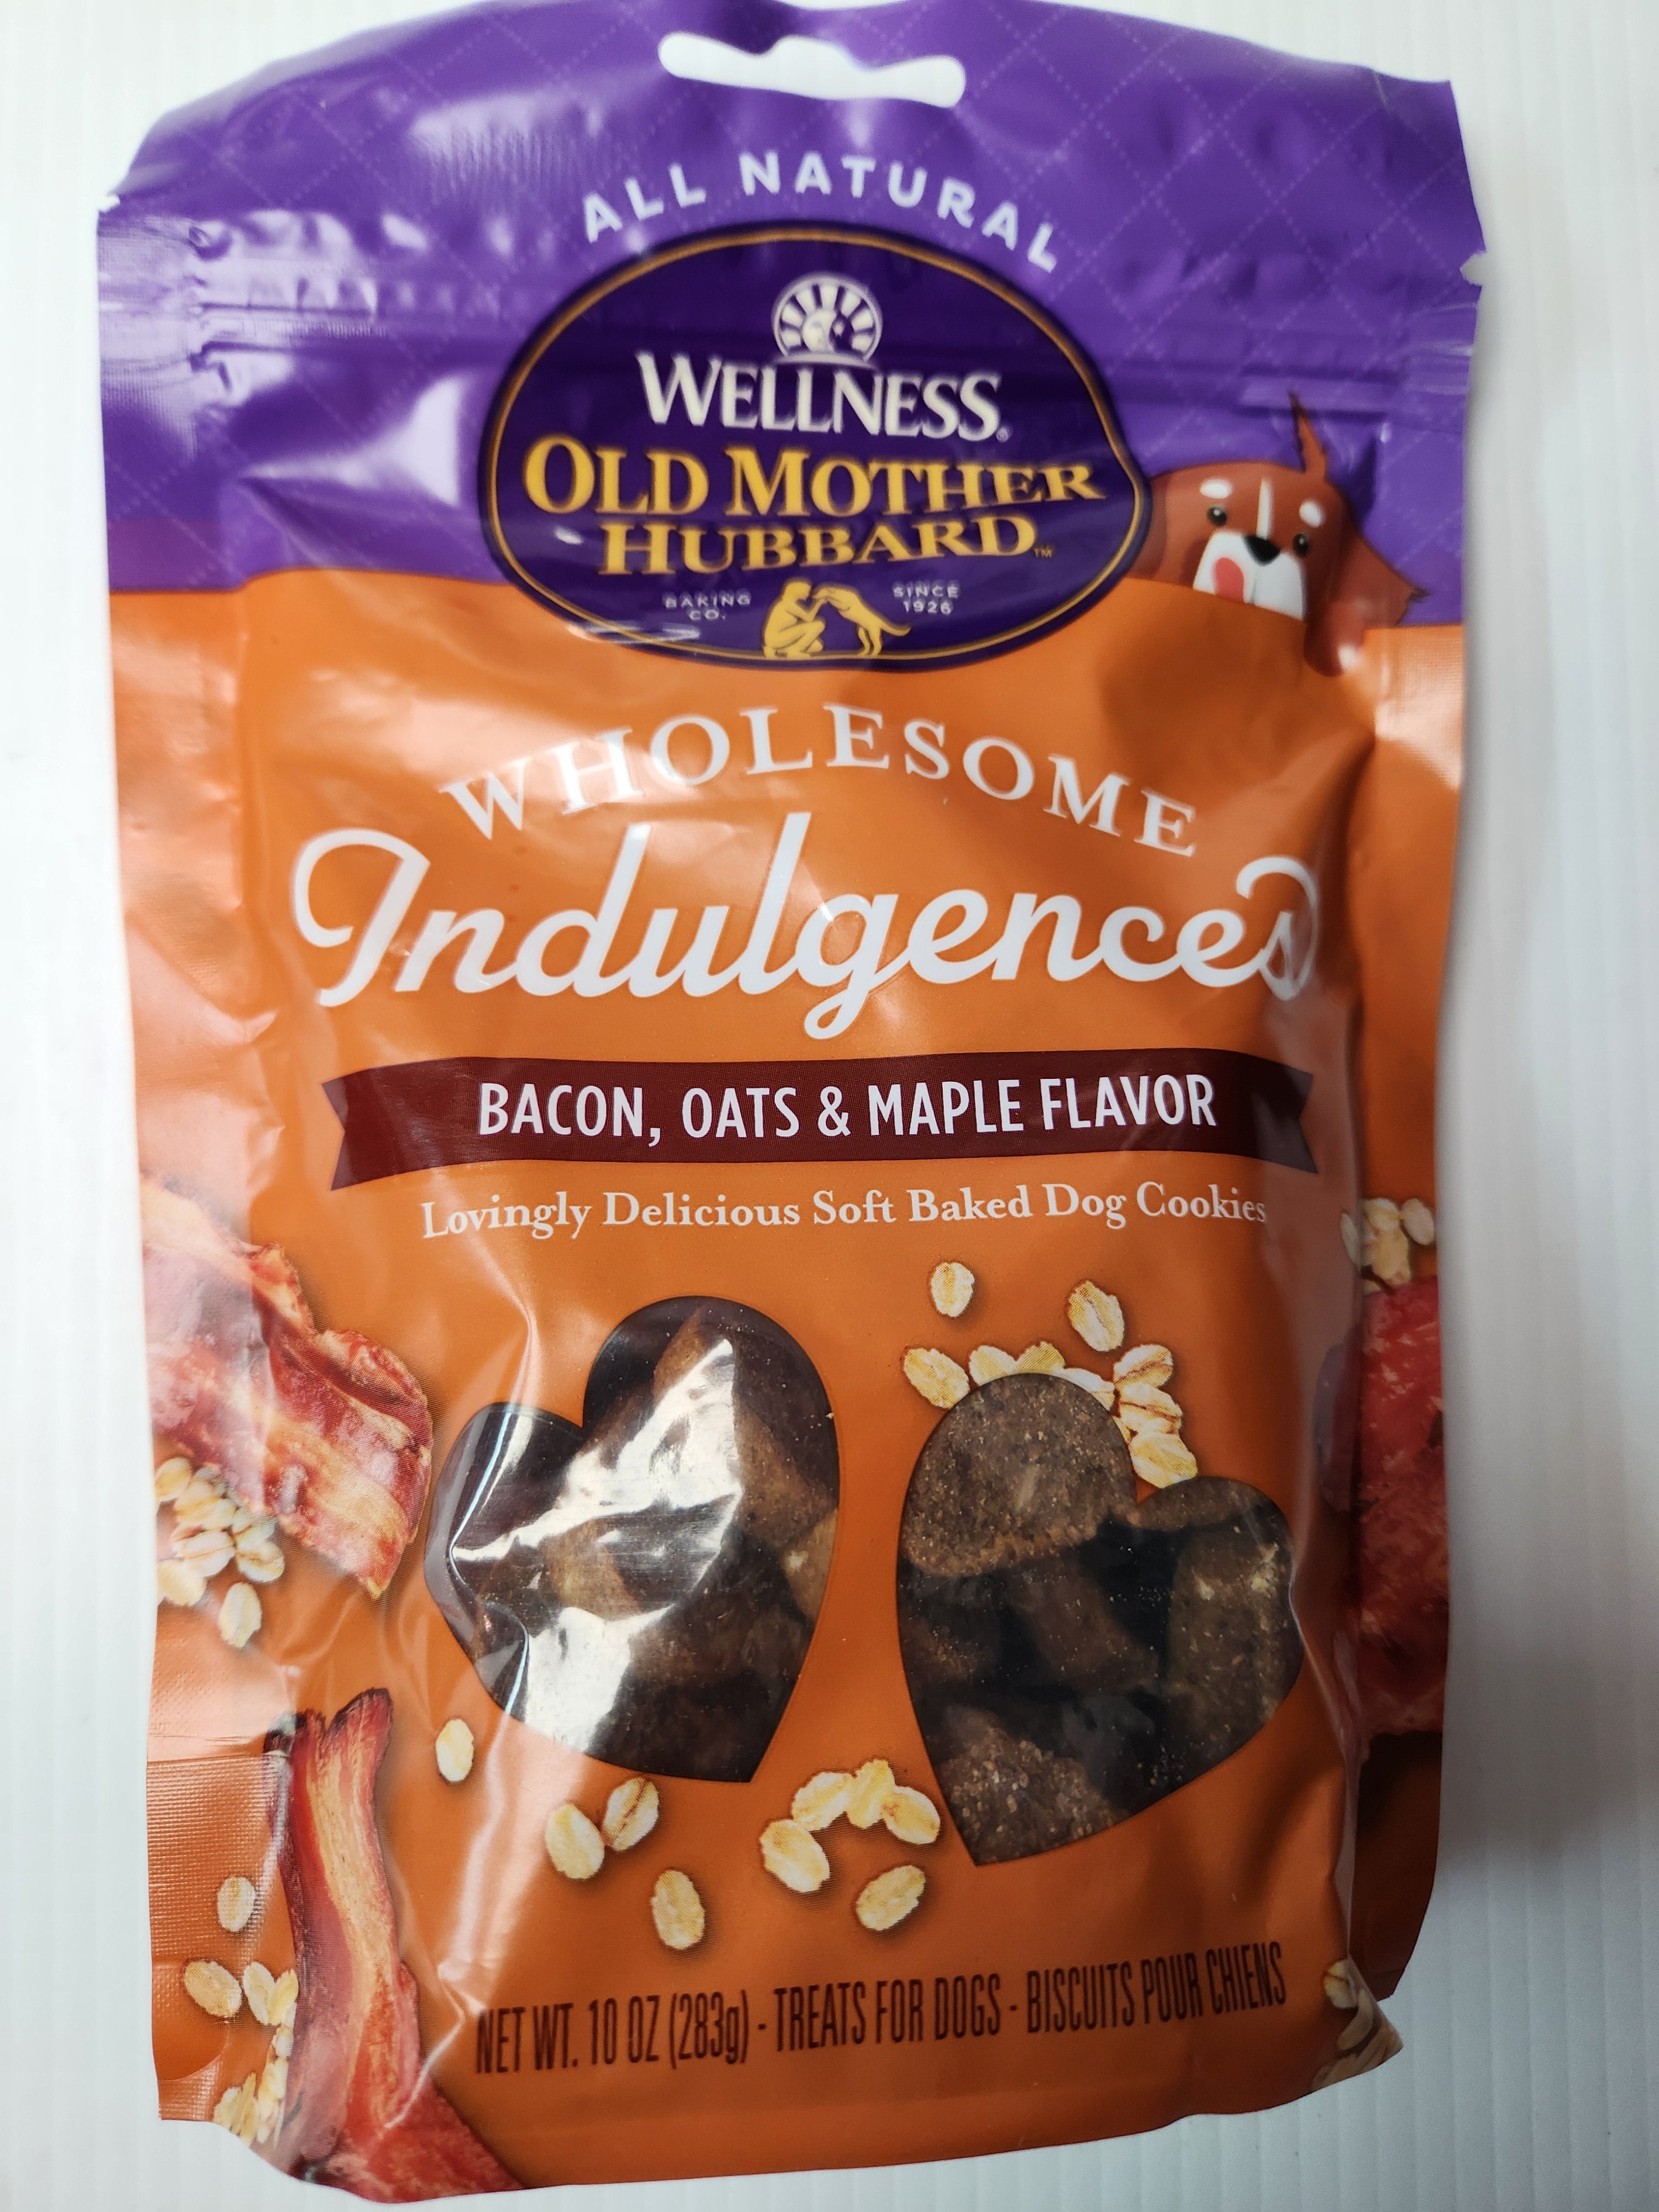 Wellness Old Mother Hubbard Wholesome Indulgences Bacon, Oats & Maple Flavor Soft Baked All Natural Dog Cookies 283g